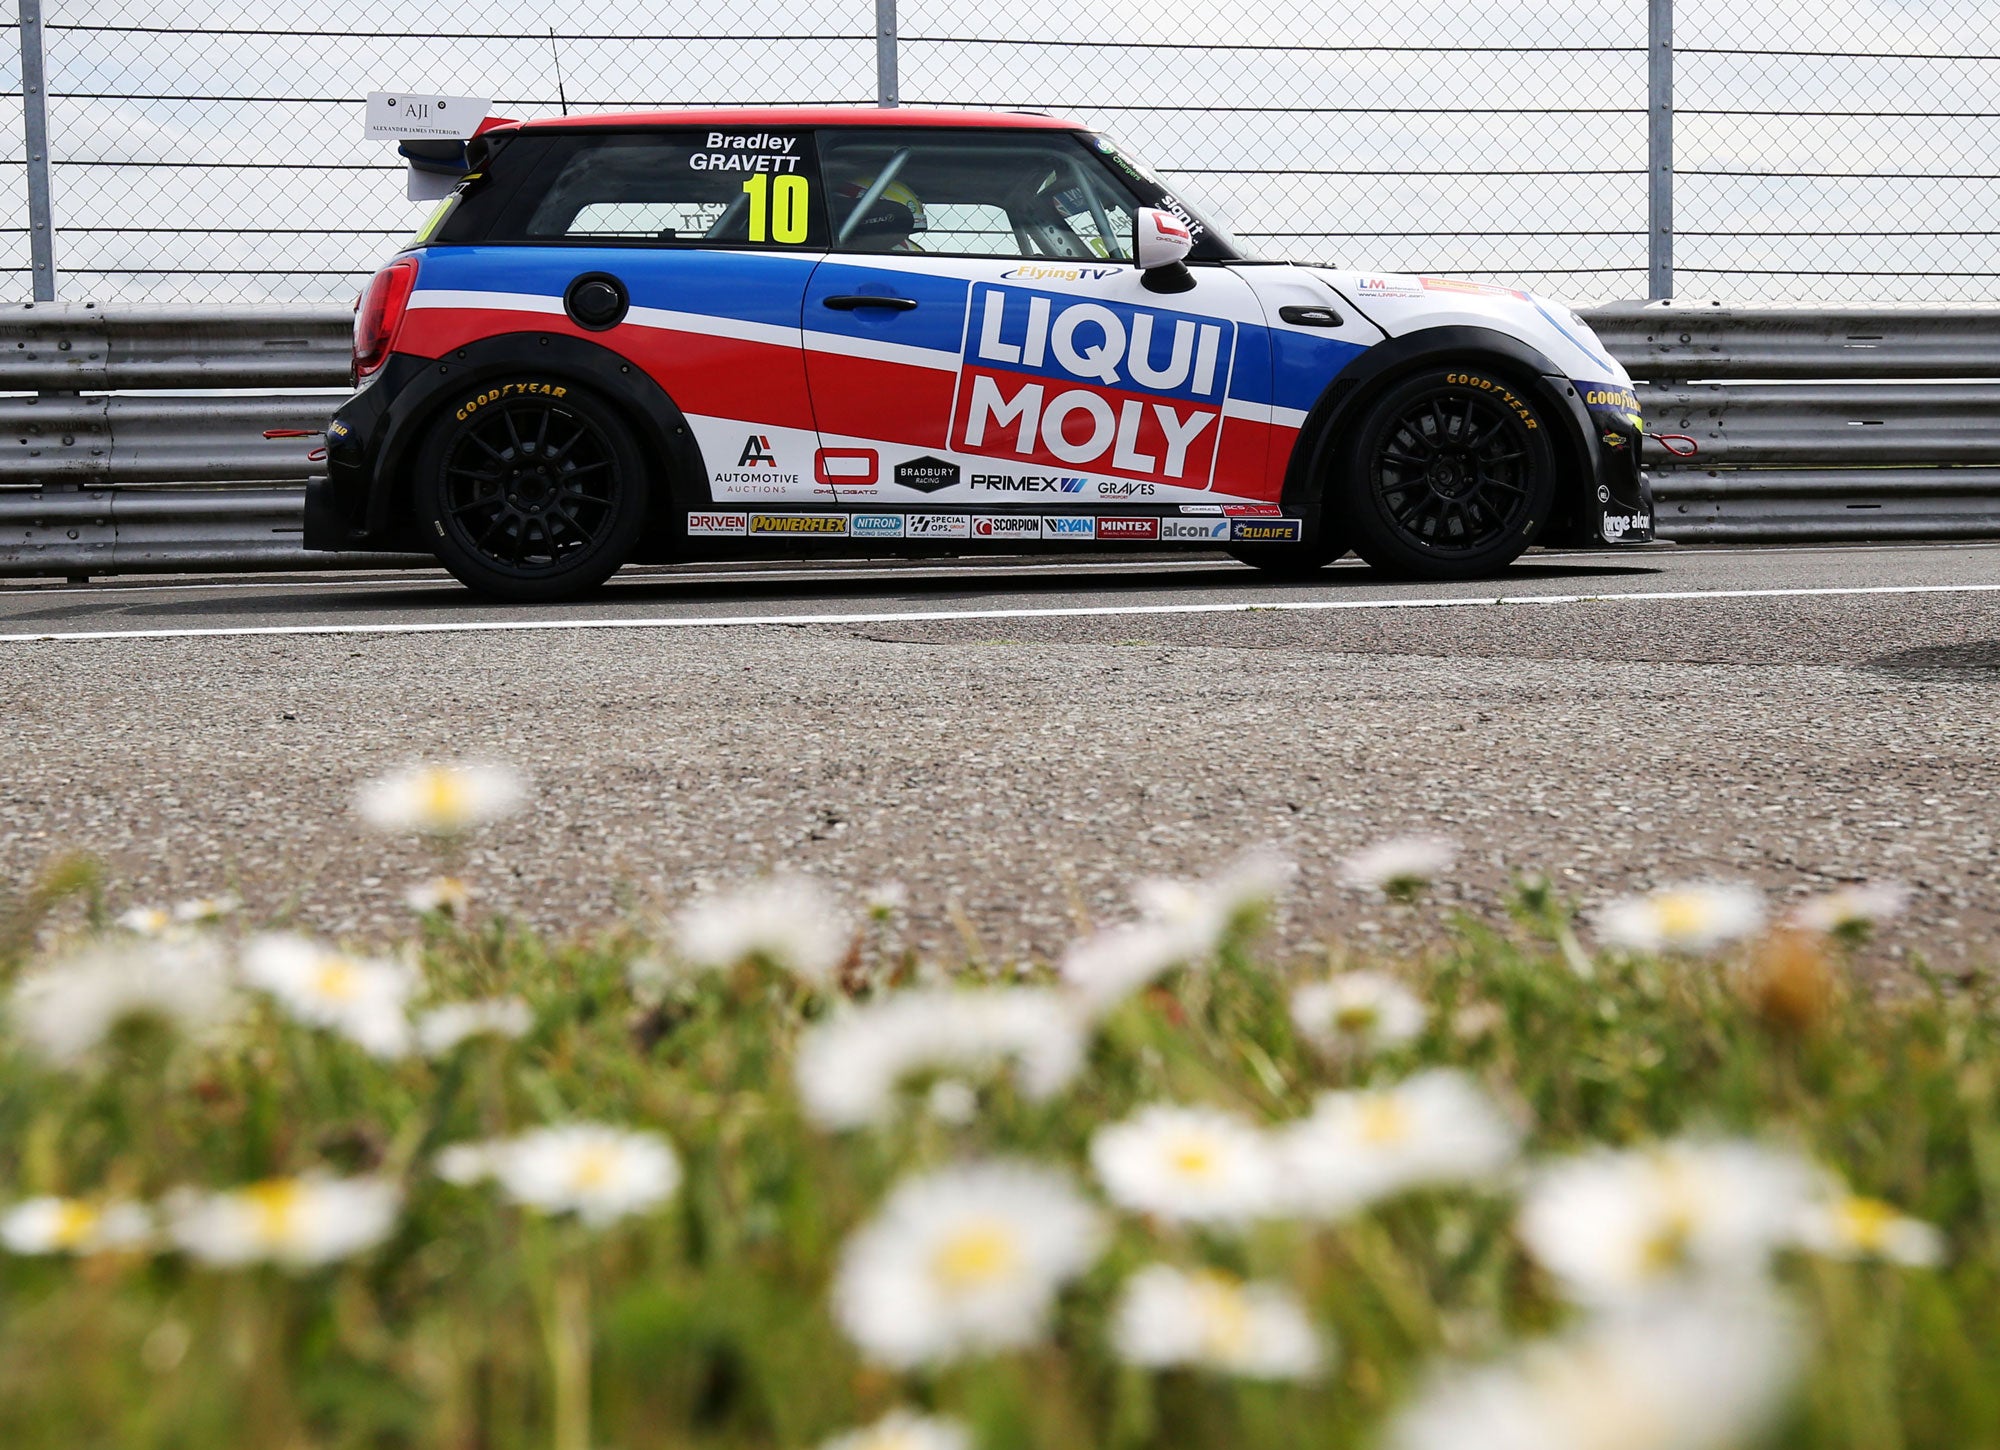 Bradley Gravett son of BTCC British Touring Car Champion Robb Gravett in the MINI Challenge JCW Series at Snetterton in 2021 with Flowers in Foreground Graves Motorsport Cooper Racing Driver LIQUI MOLY LM Performance Thinking it Better